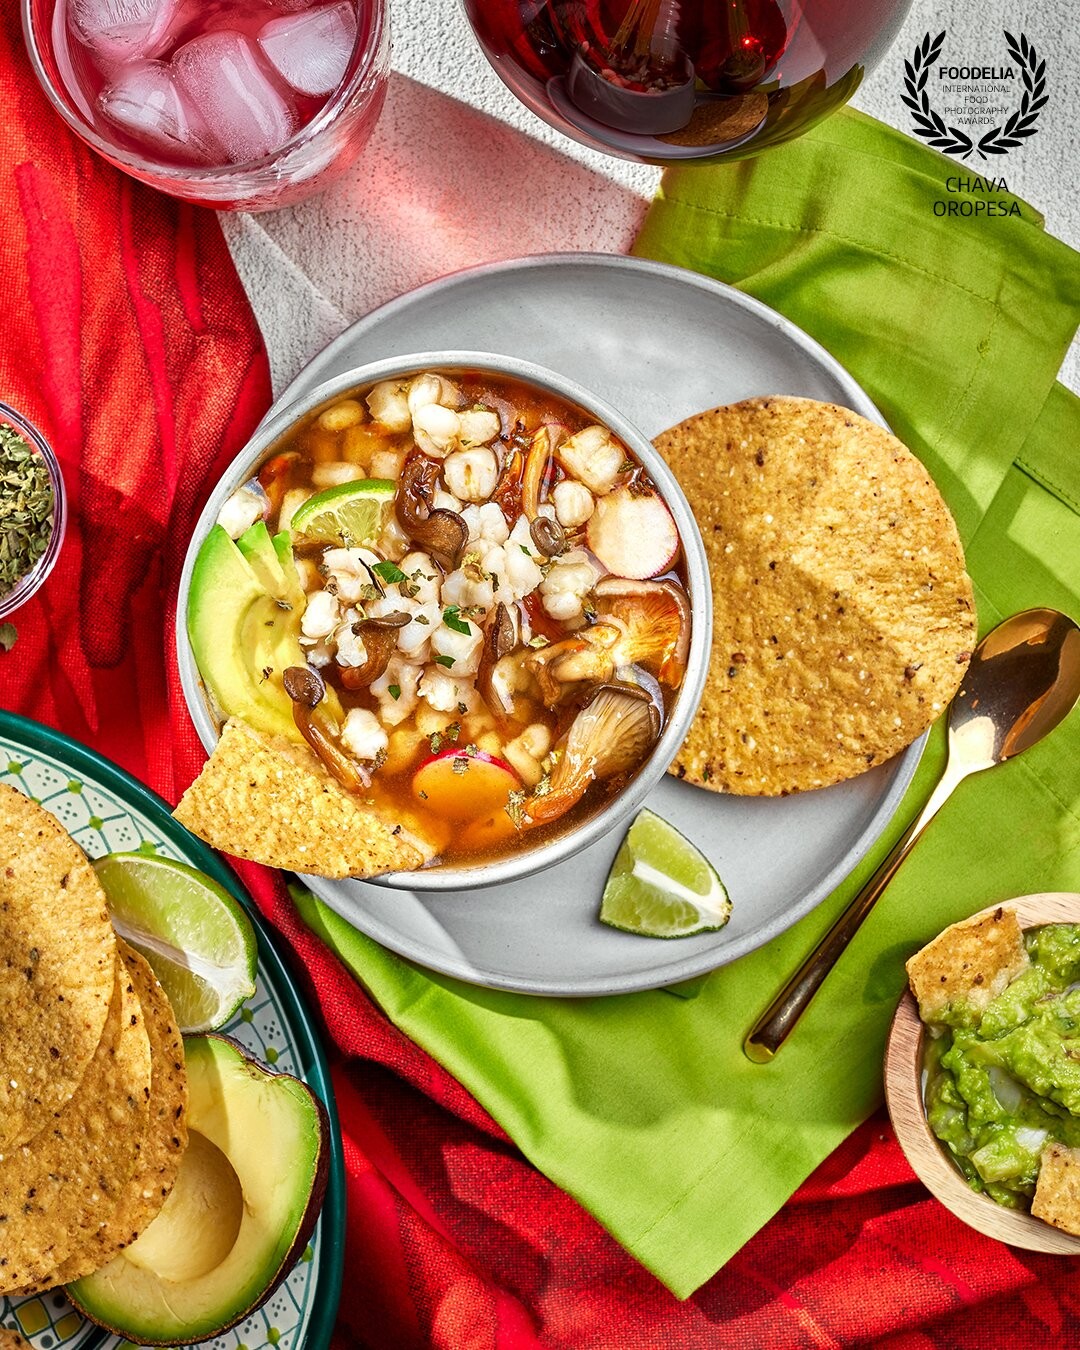 Pozole is probably the most traditional Mexican soup. It's served during celebrations and parties but it's also a big staple of everyday Mexican food. Primarily made with hominy, chicken or pork then topped with shredded lettuce, avocado, oregano, and radishes. This version was made with mushrooms, for VegNews magazine Christmas issue.